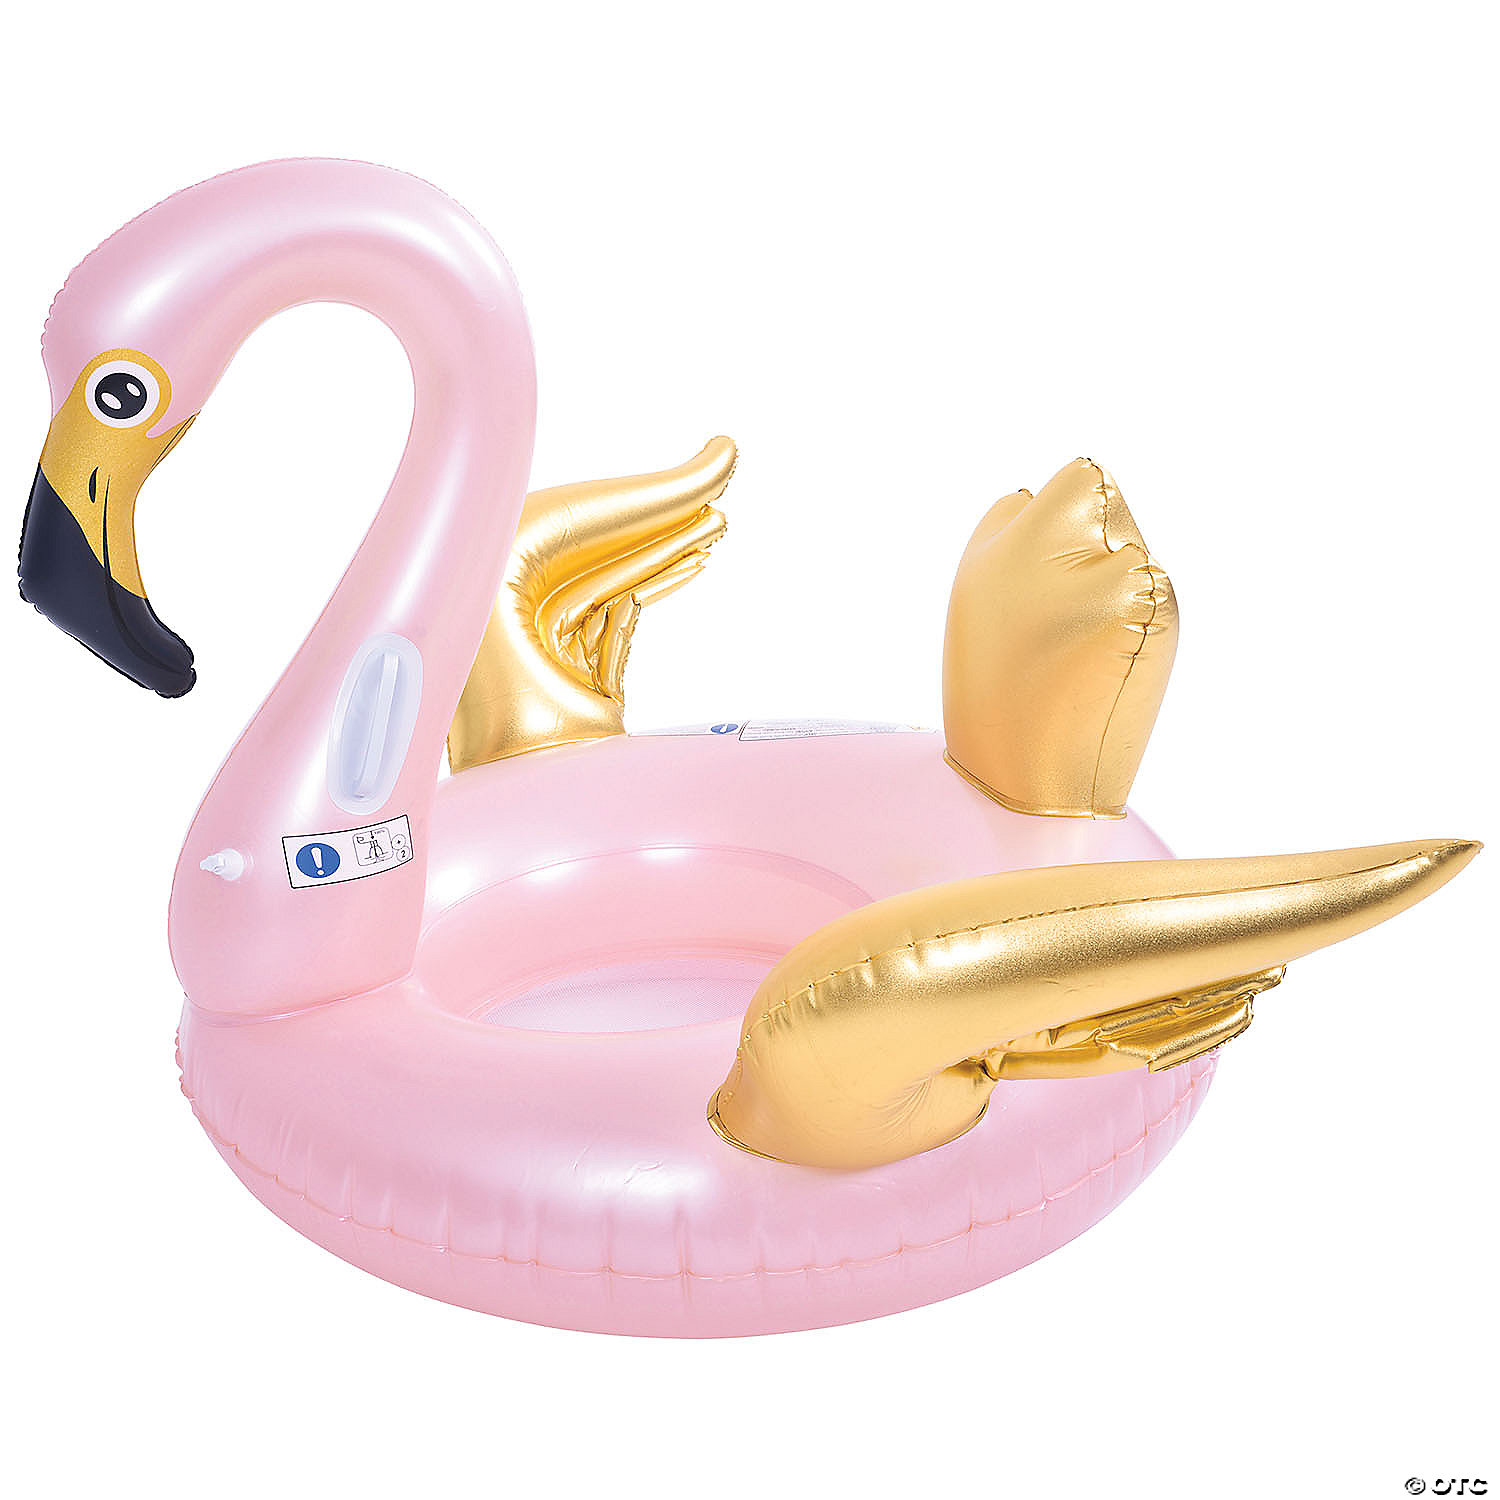 Xinyu Inflatable Floaties Flamingo Swimming Ring Rose Gold Bird Swim Aids Pool Boat Float Raft Lounger Beach Summer Play Toys for Children Kids 